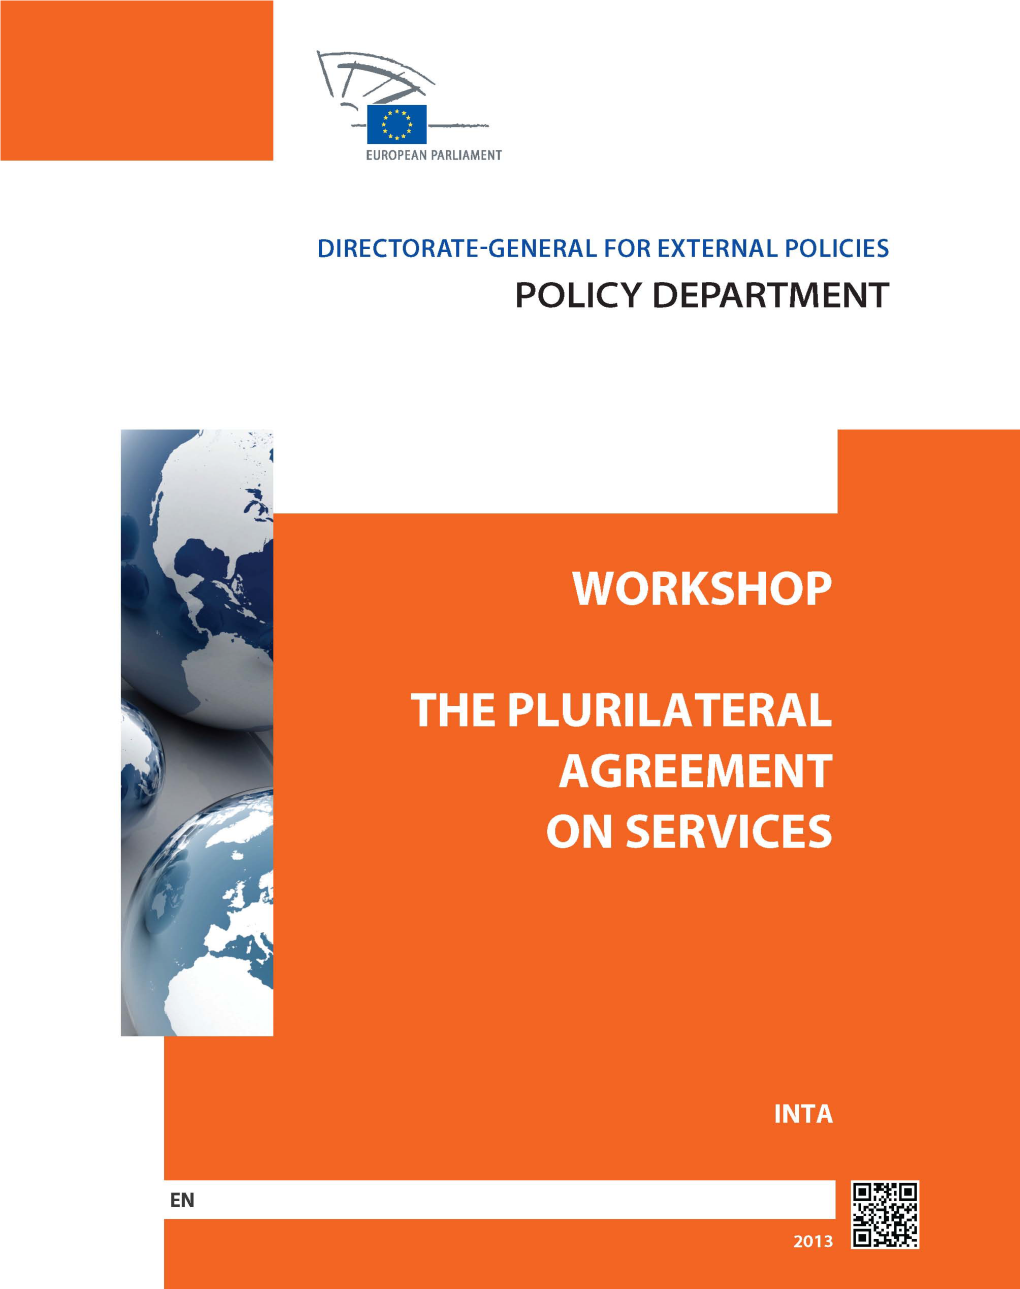 The Plurilateral Agreement on Services